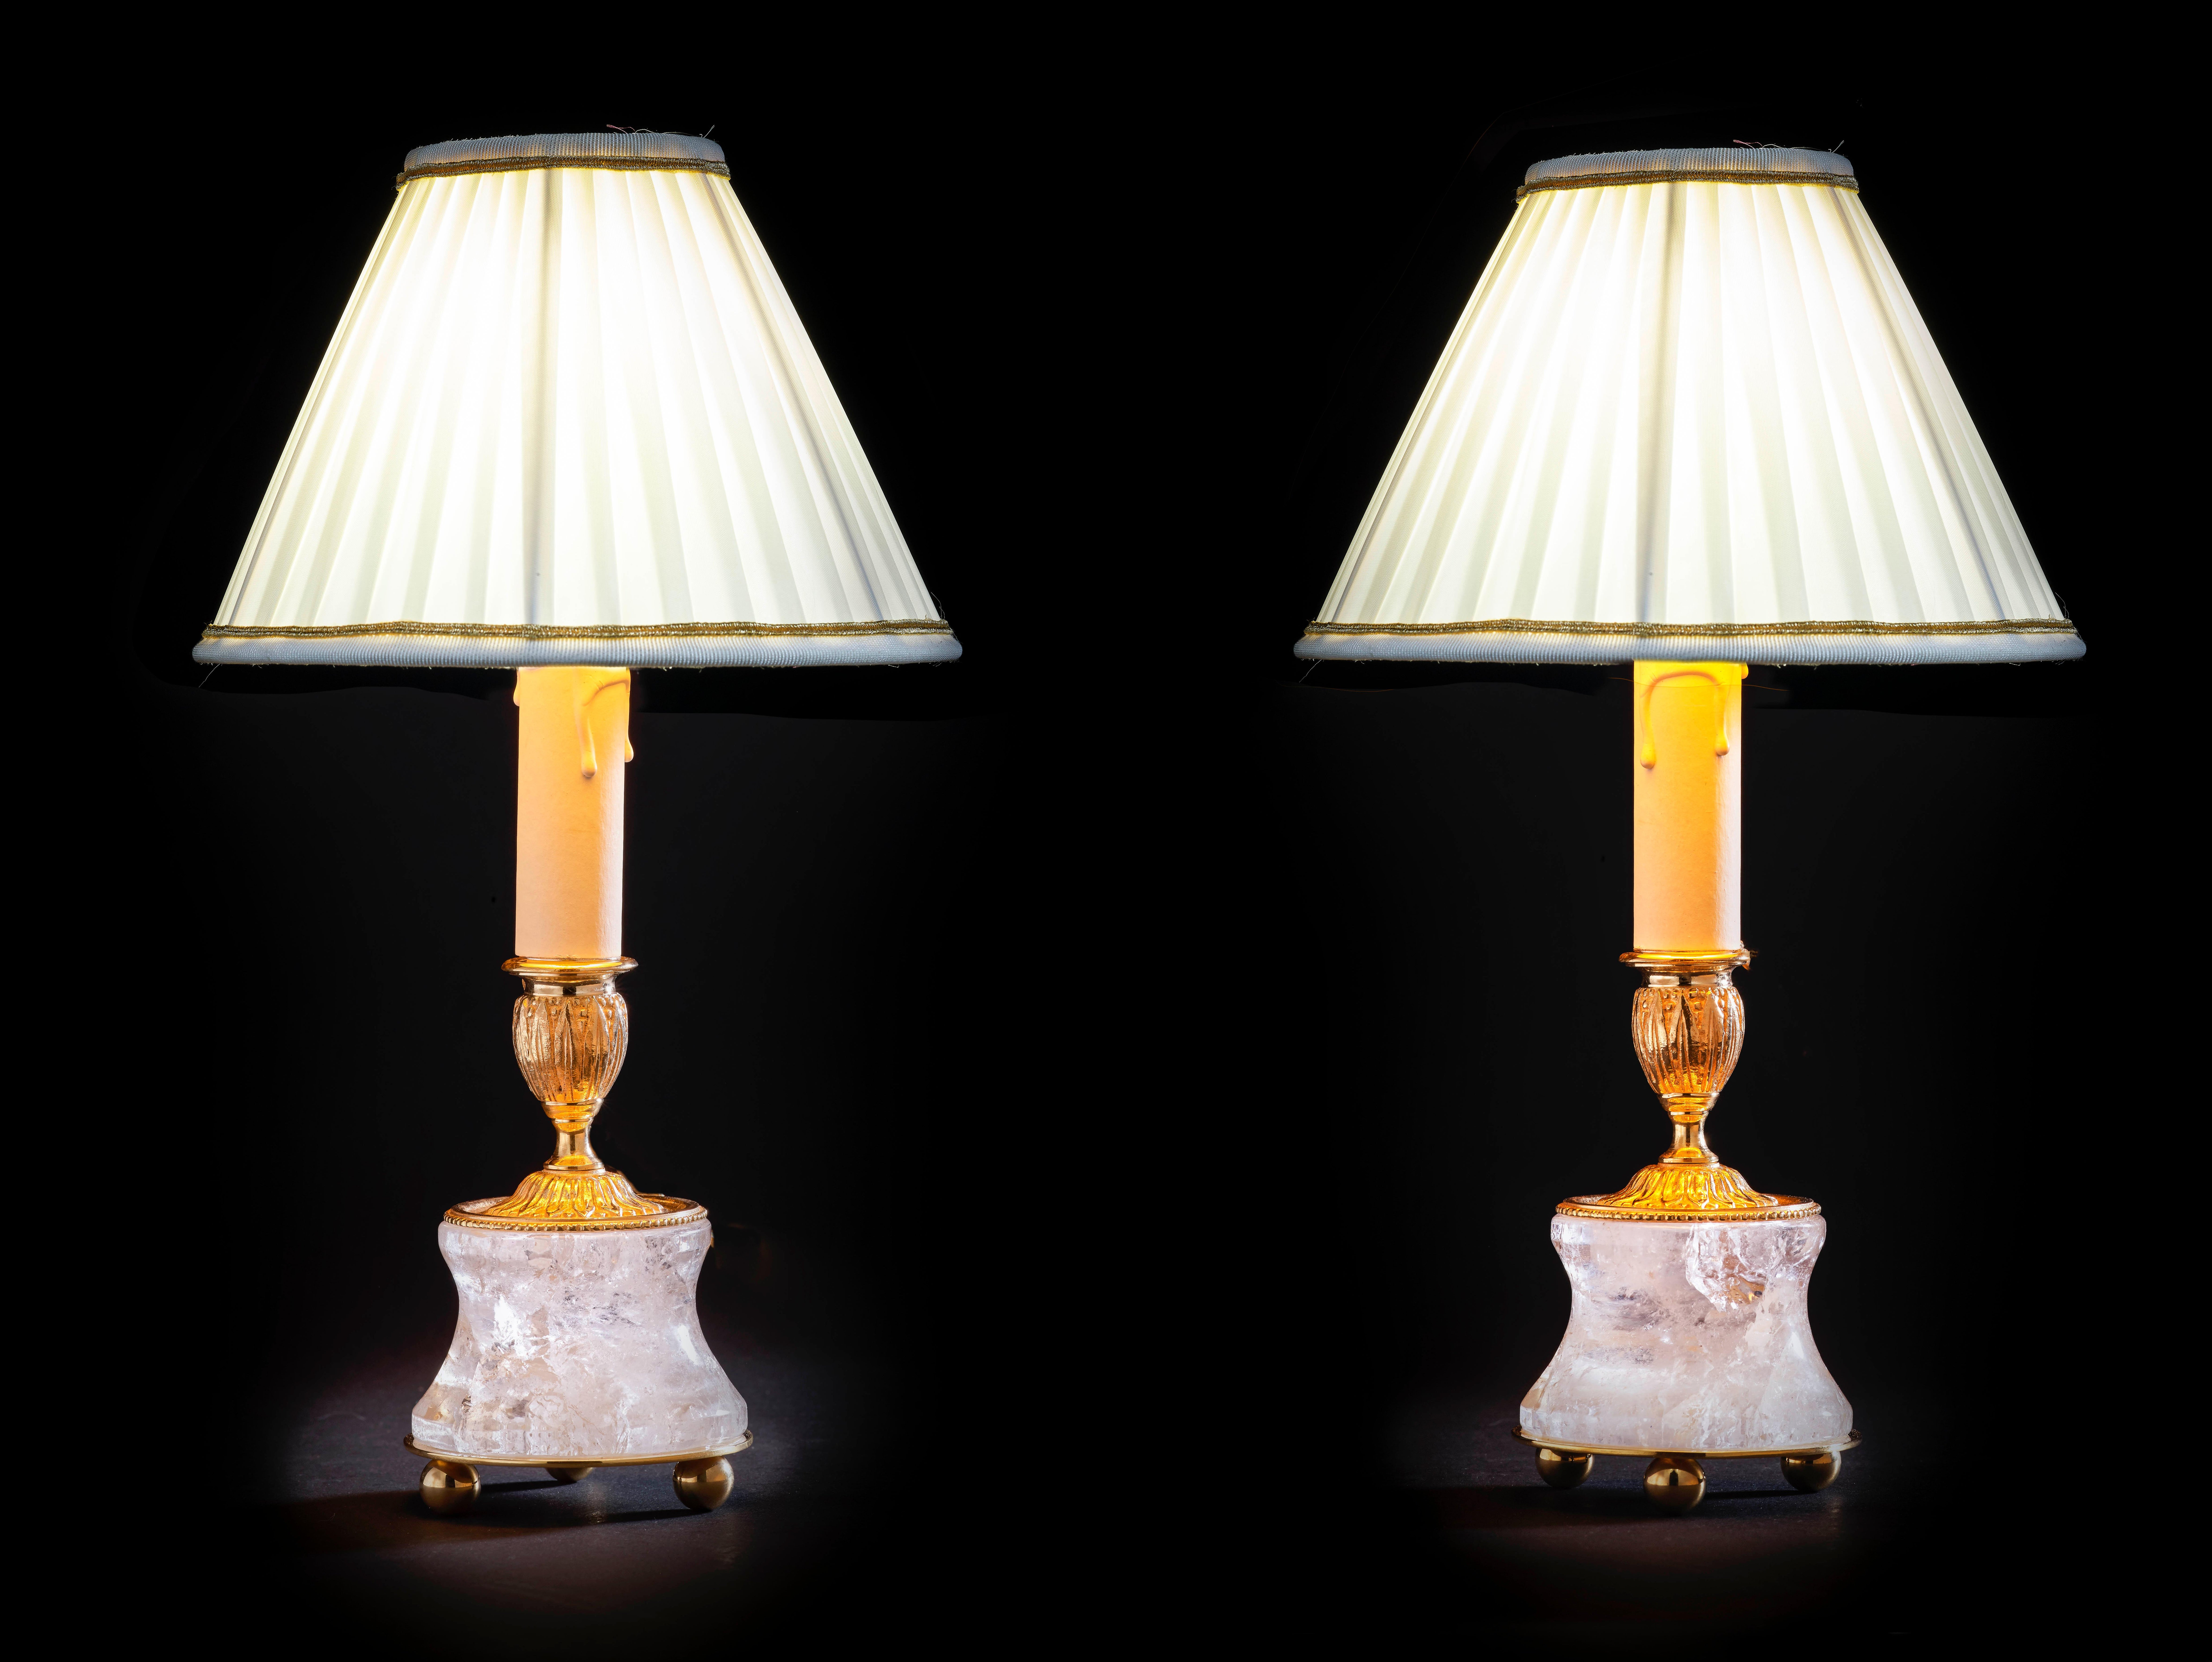 Rock crystal lamps by Alexandre Vossion.
Model III, Louis XVI style.
Rock crystal polished and carved stone, bronze, 24-karat gilding, customized lampshade. Two in ones: you can easily used as a pair of candlesticks on your dining table but also